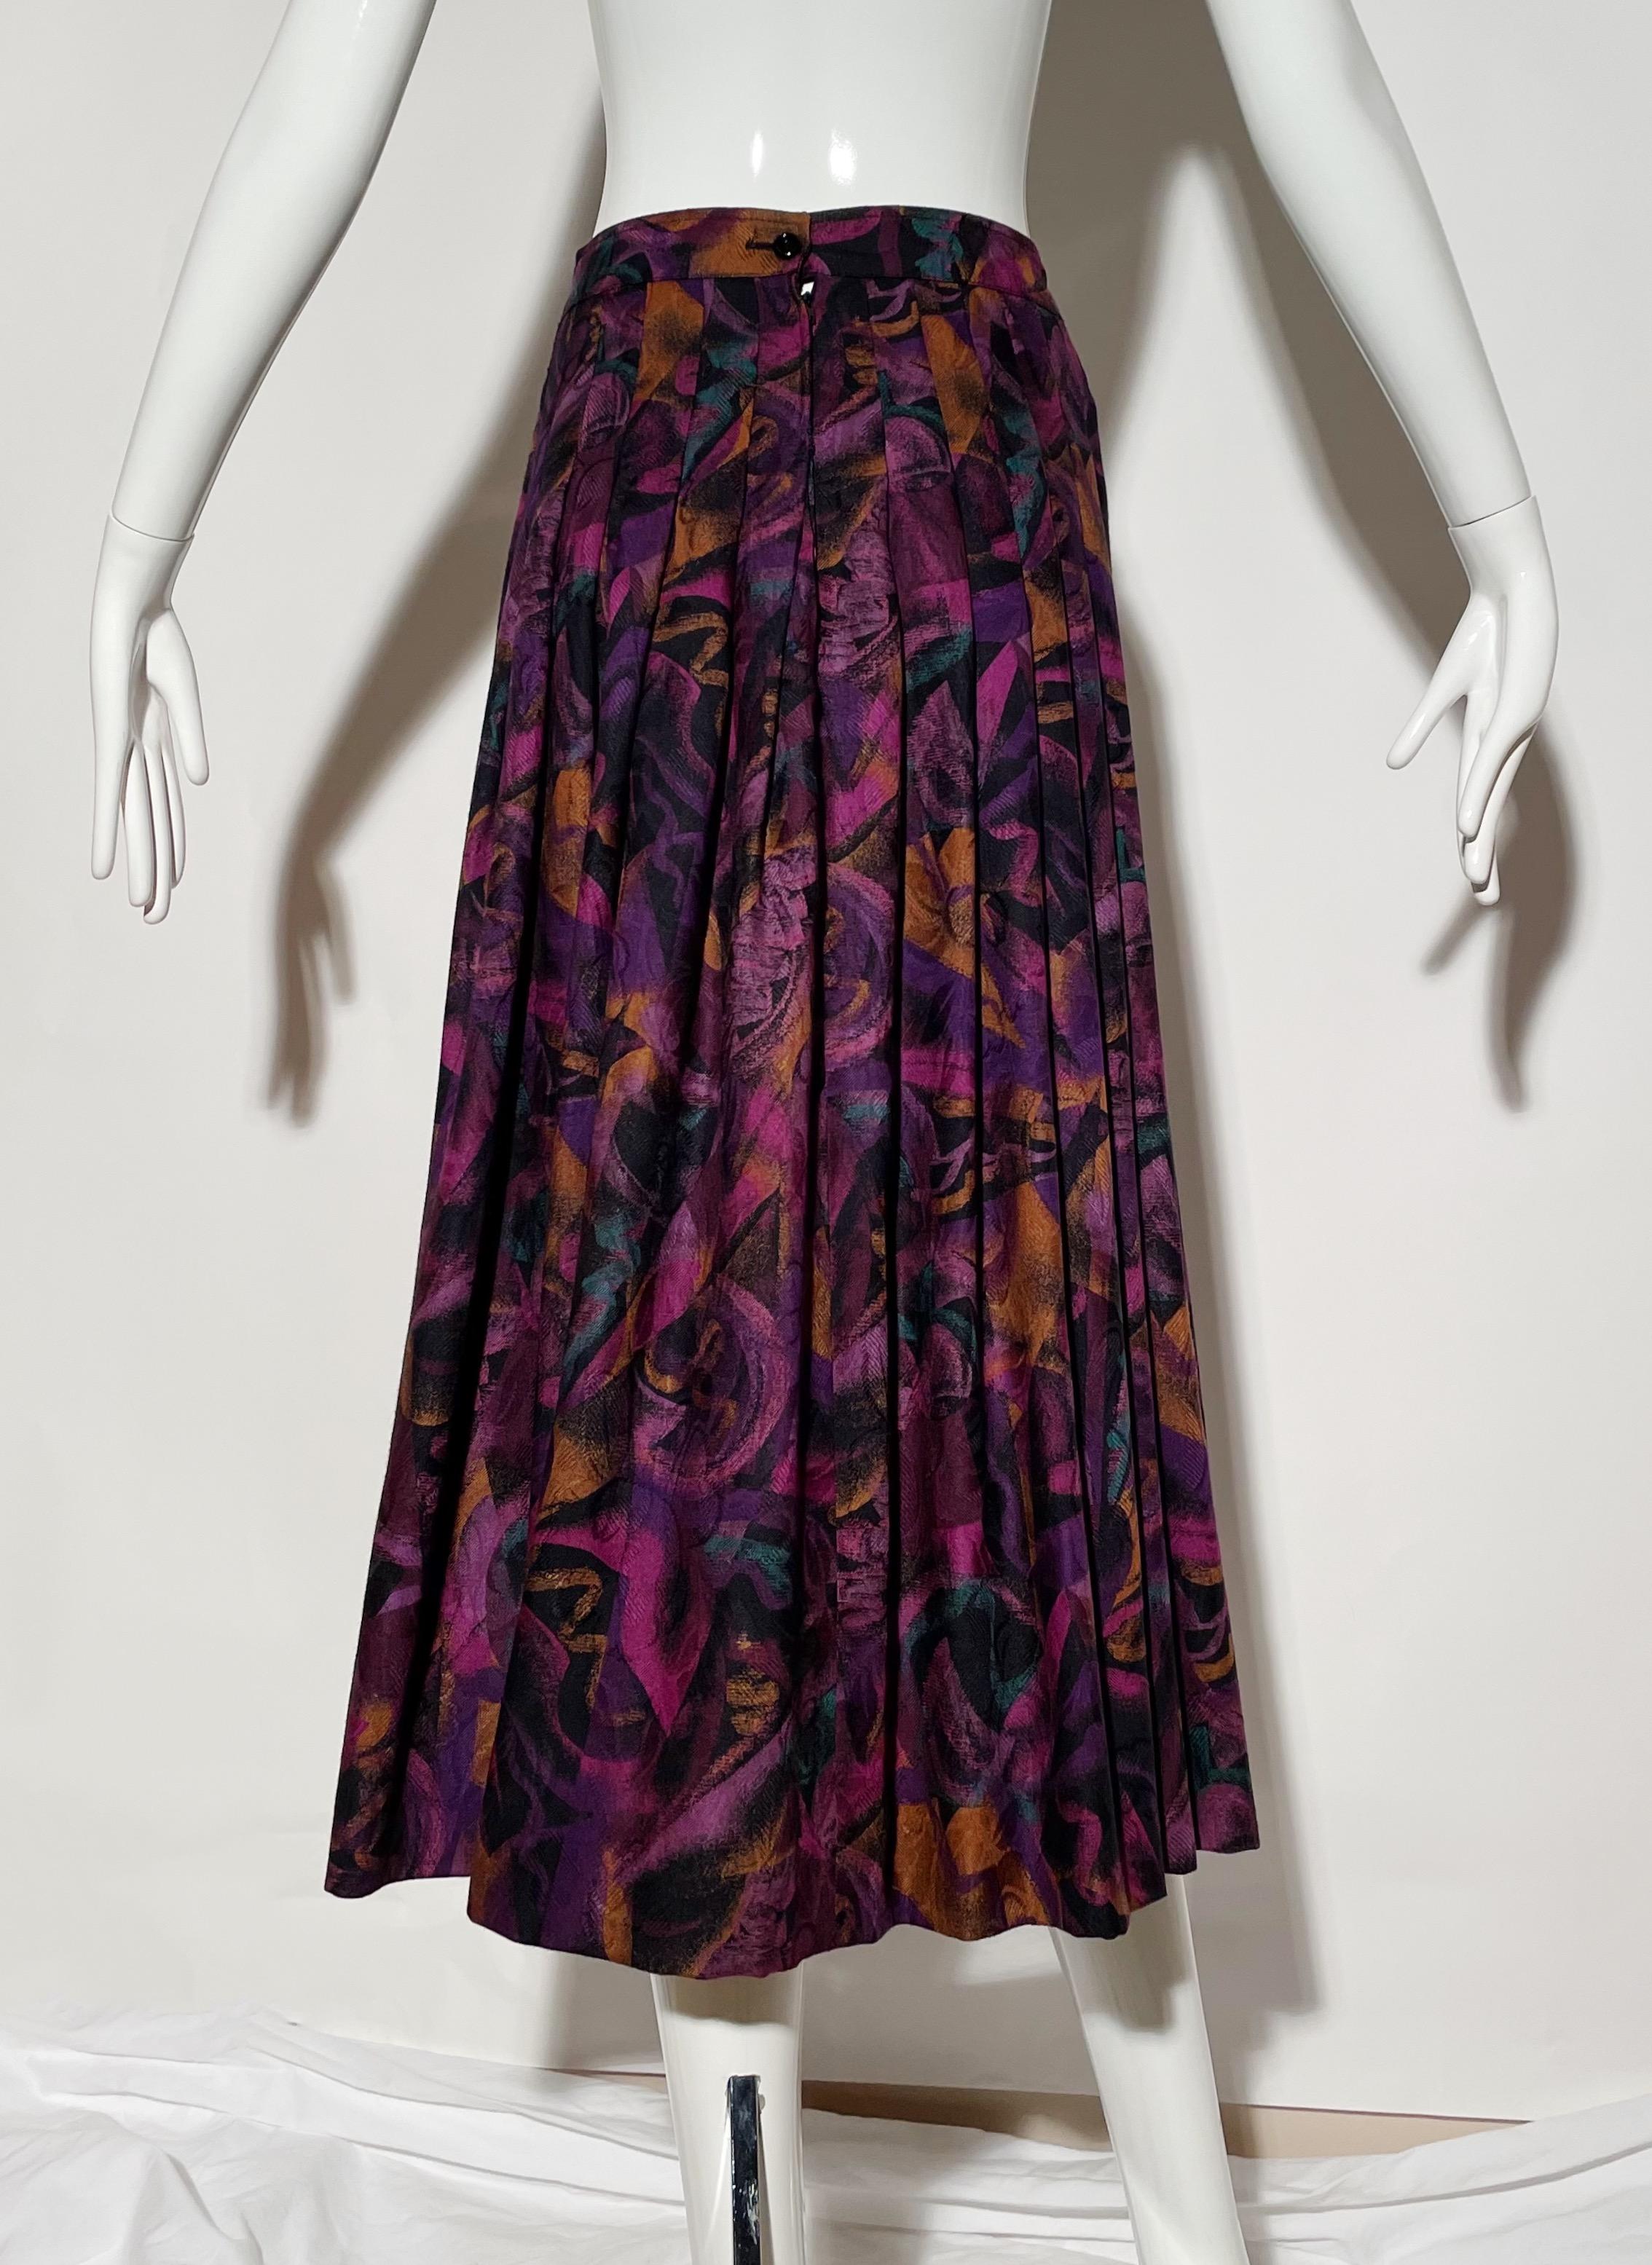 Emanuel Ungaro Pleated Printed Skirt  In Excellent Condition For Sale In Los Angeles, CA